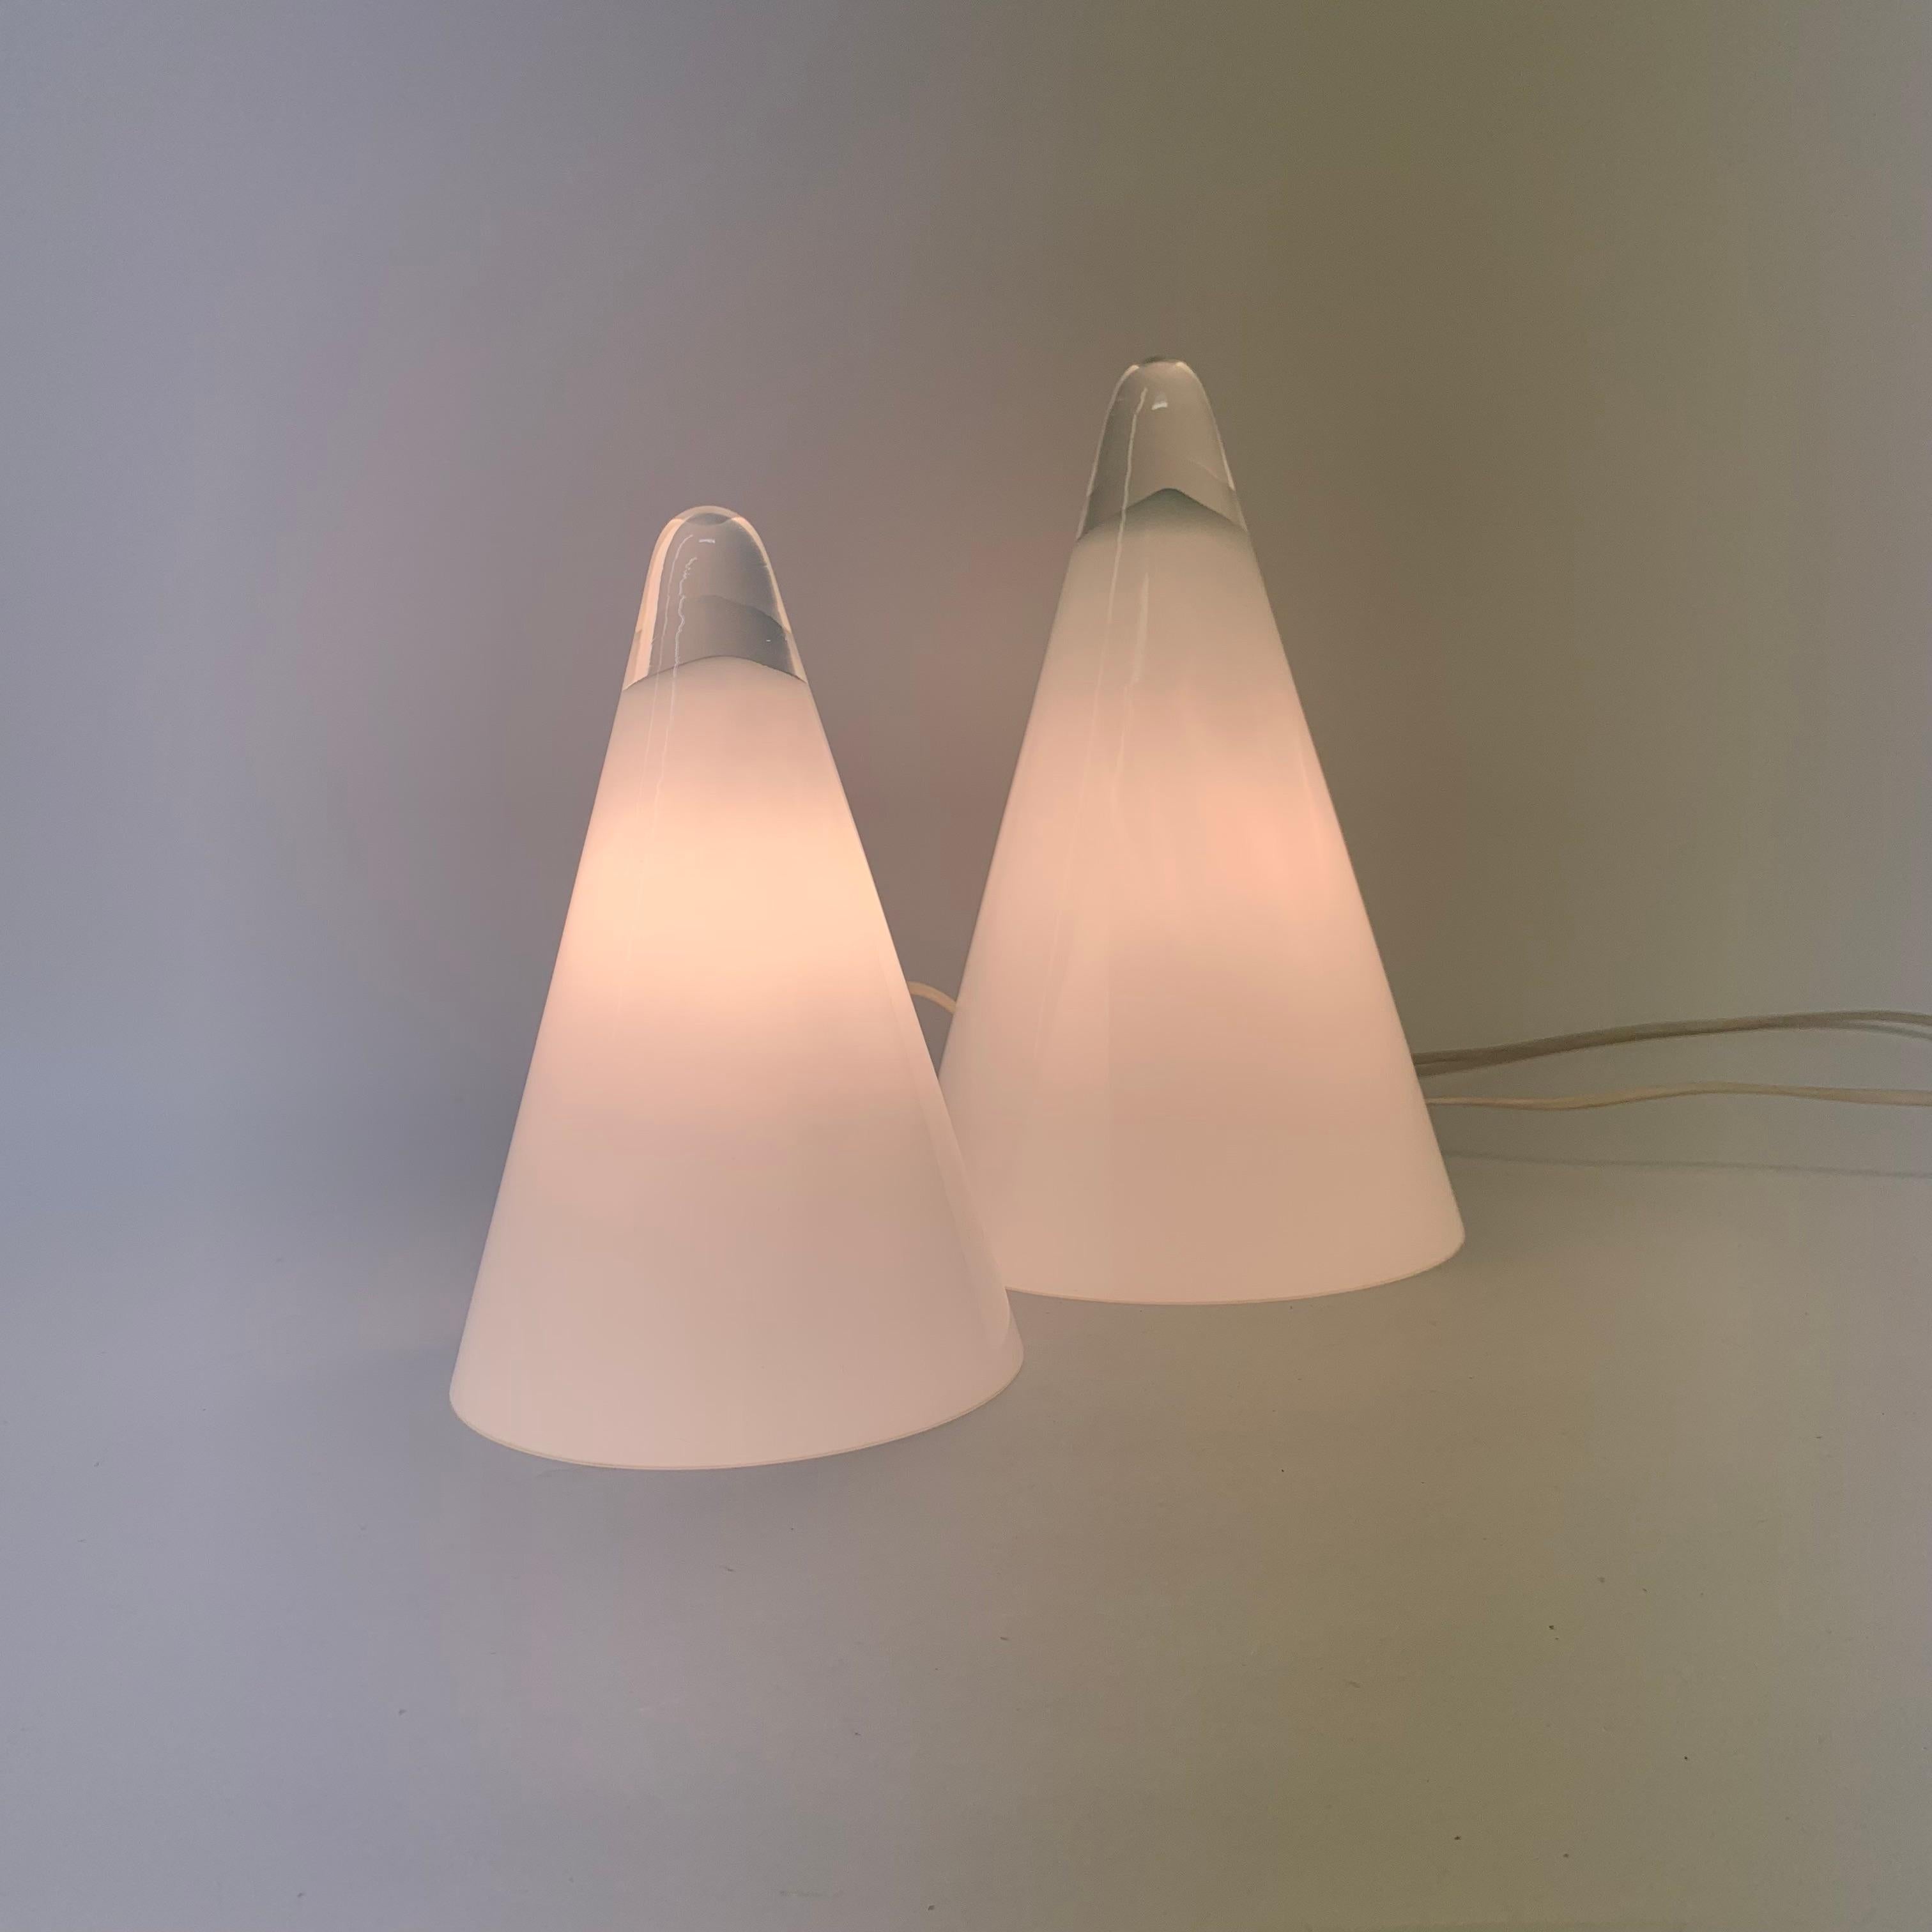 Set of 2 Ilu Glass Table Lamps, 1970's For Sale 7